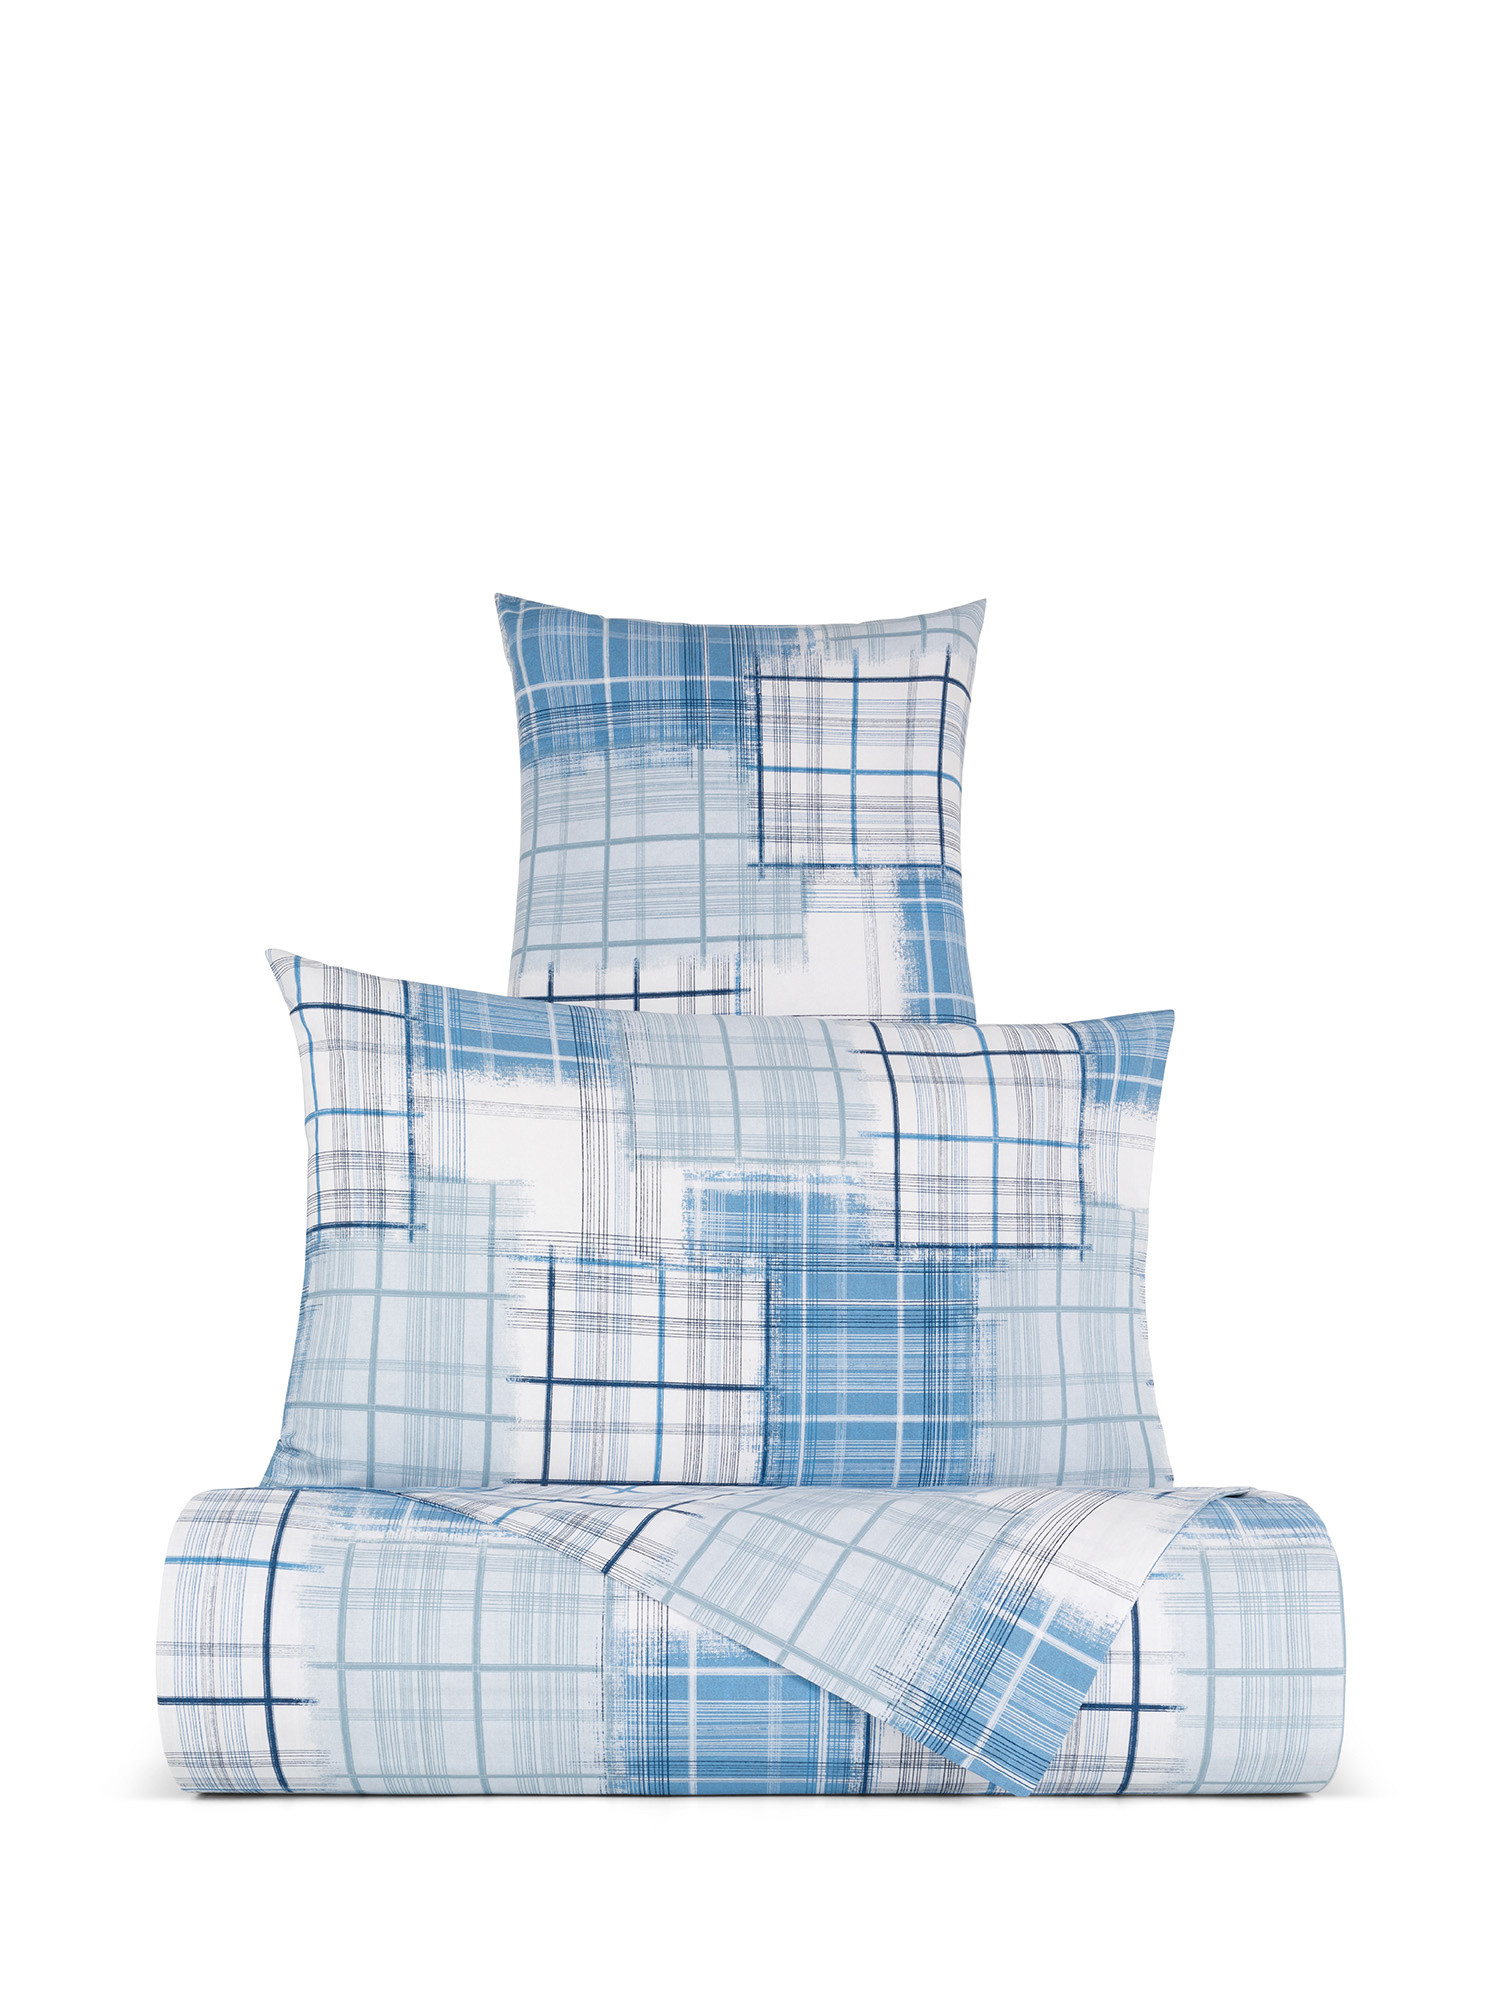 Geometric patterned cotton percale duvet cover set, Blue, large image number 0